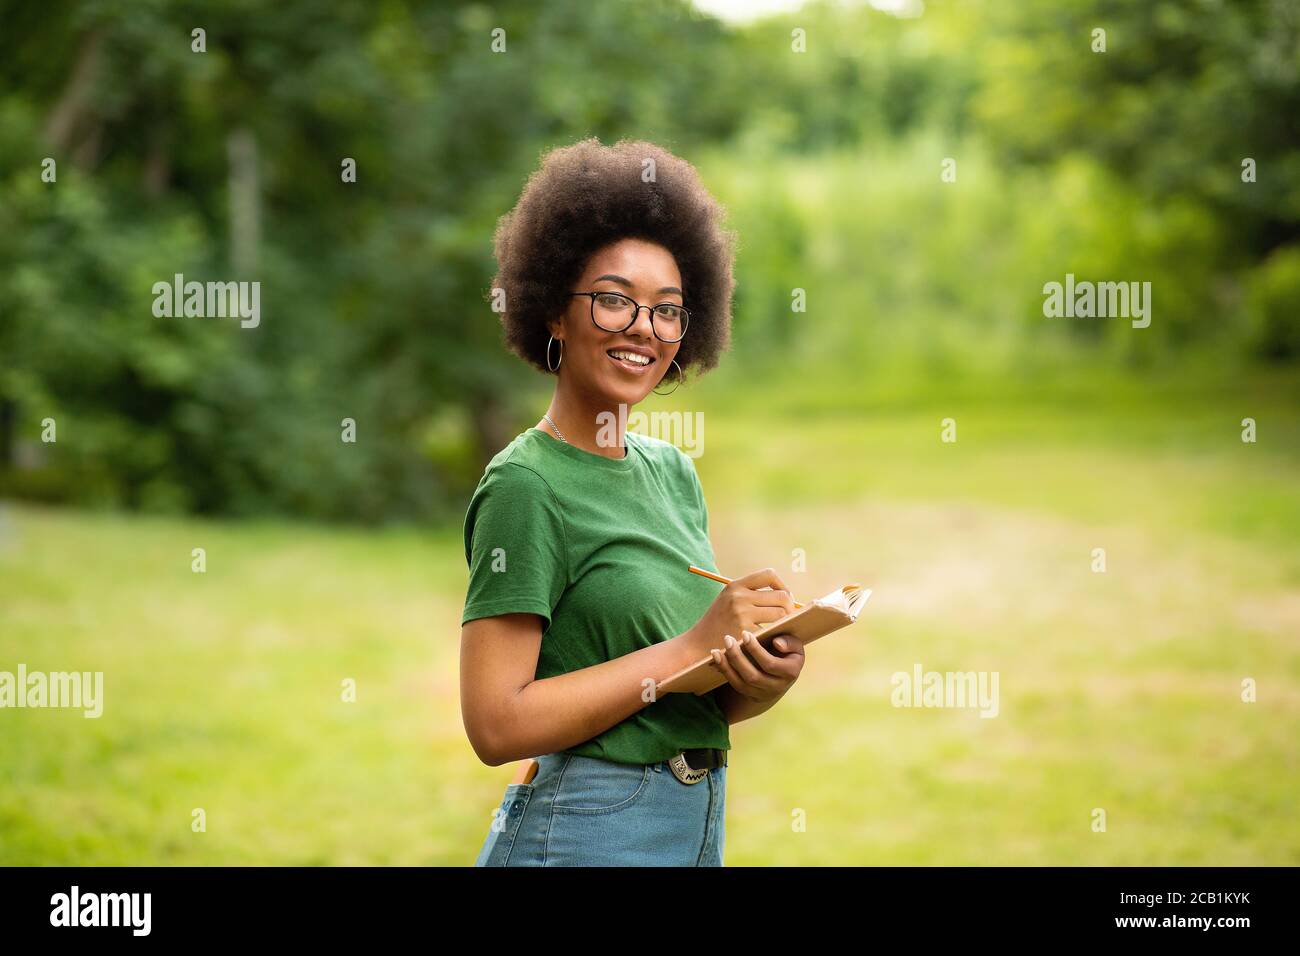 Portrait Of Cheerful Black Student Girl With Book In Hands Posing Outdoors Stock Photo